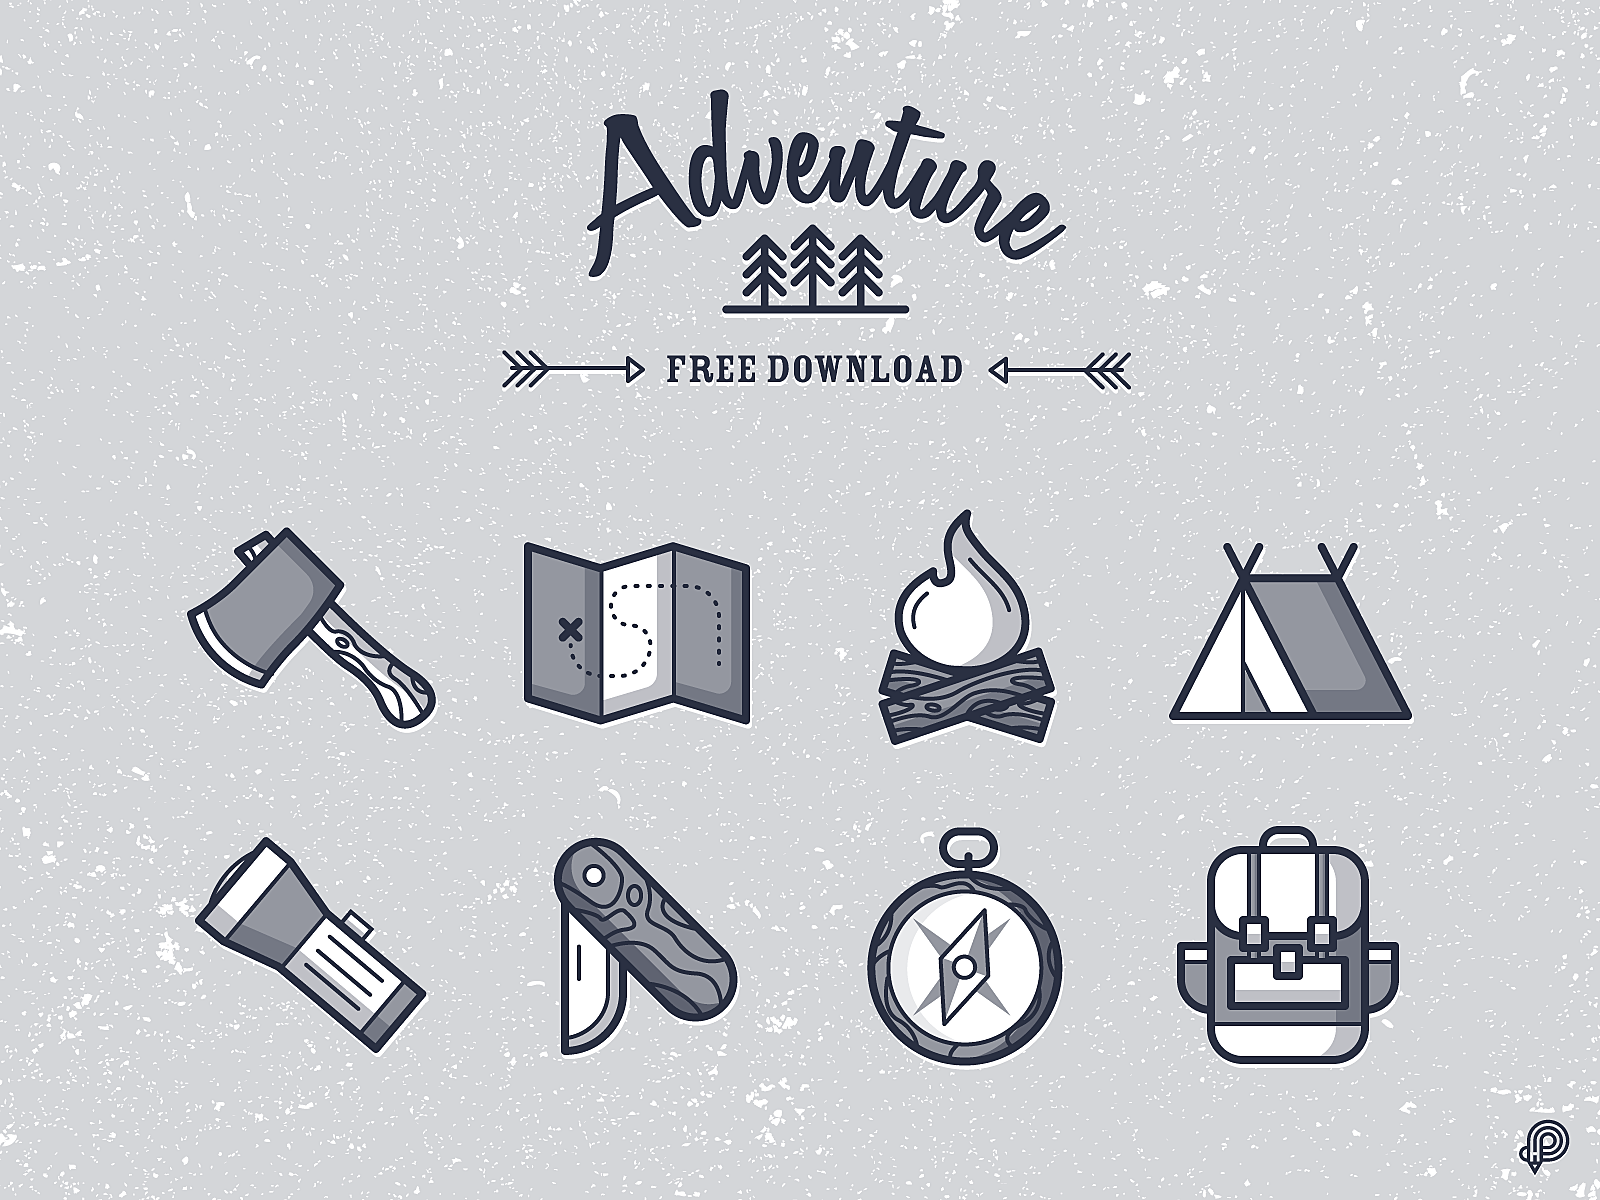 Free Download - Adventure Icons 2d adventure axe bag compass design fire flashlight freebie freedownload freeicons icon icons illustration line lineart lines monochrome tent ui